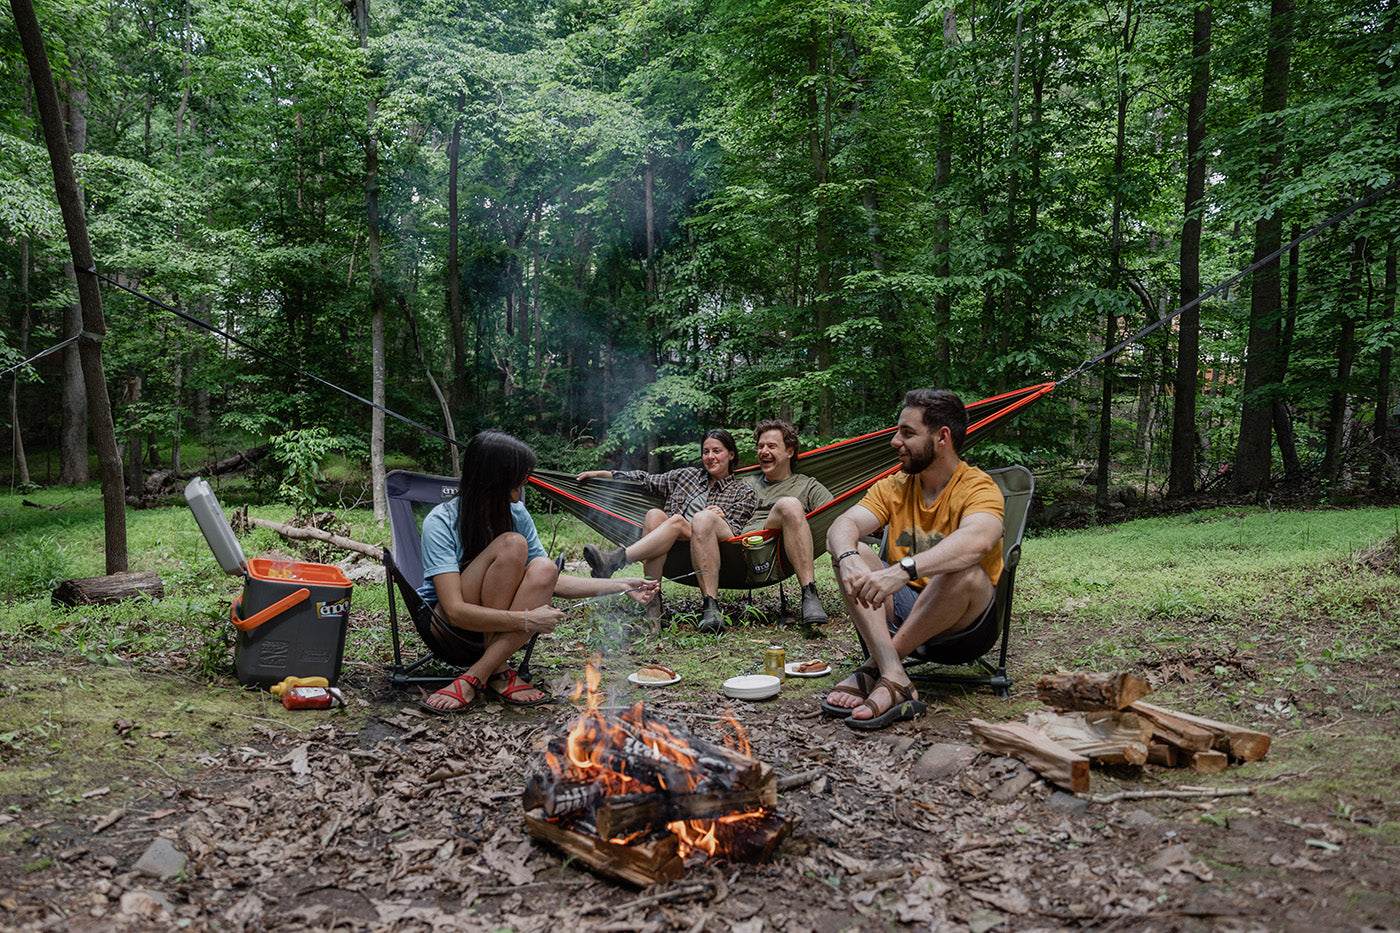 A group hangs around the fire while camping